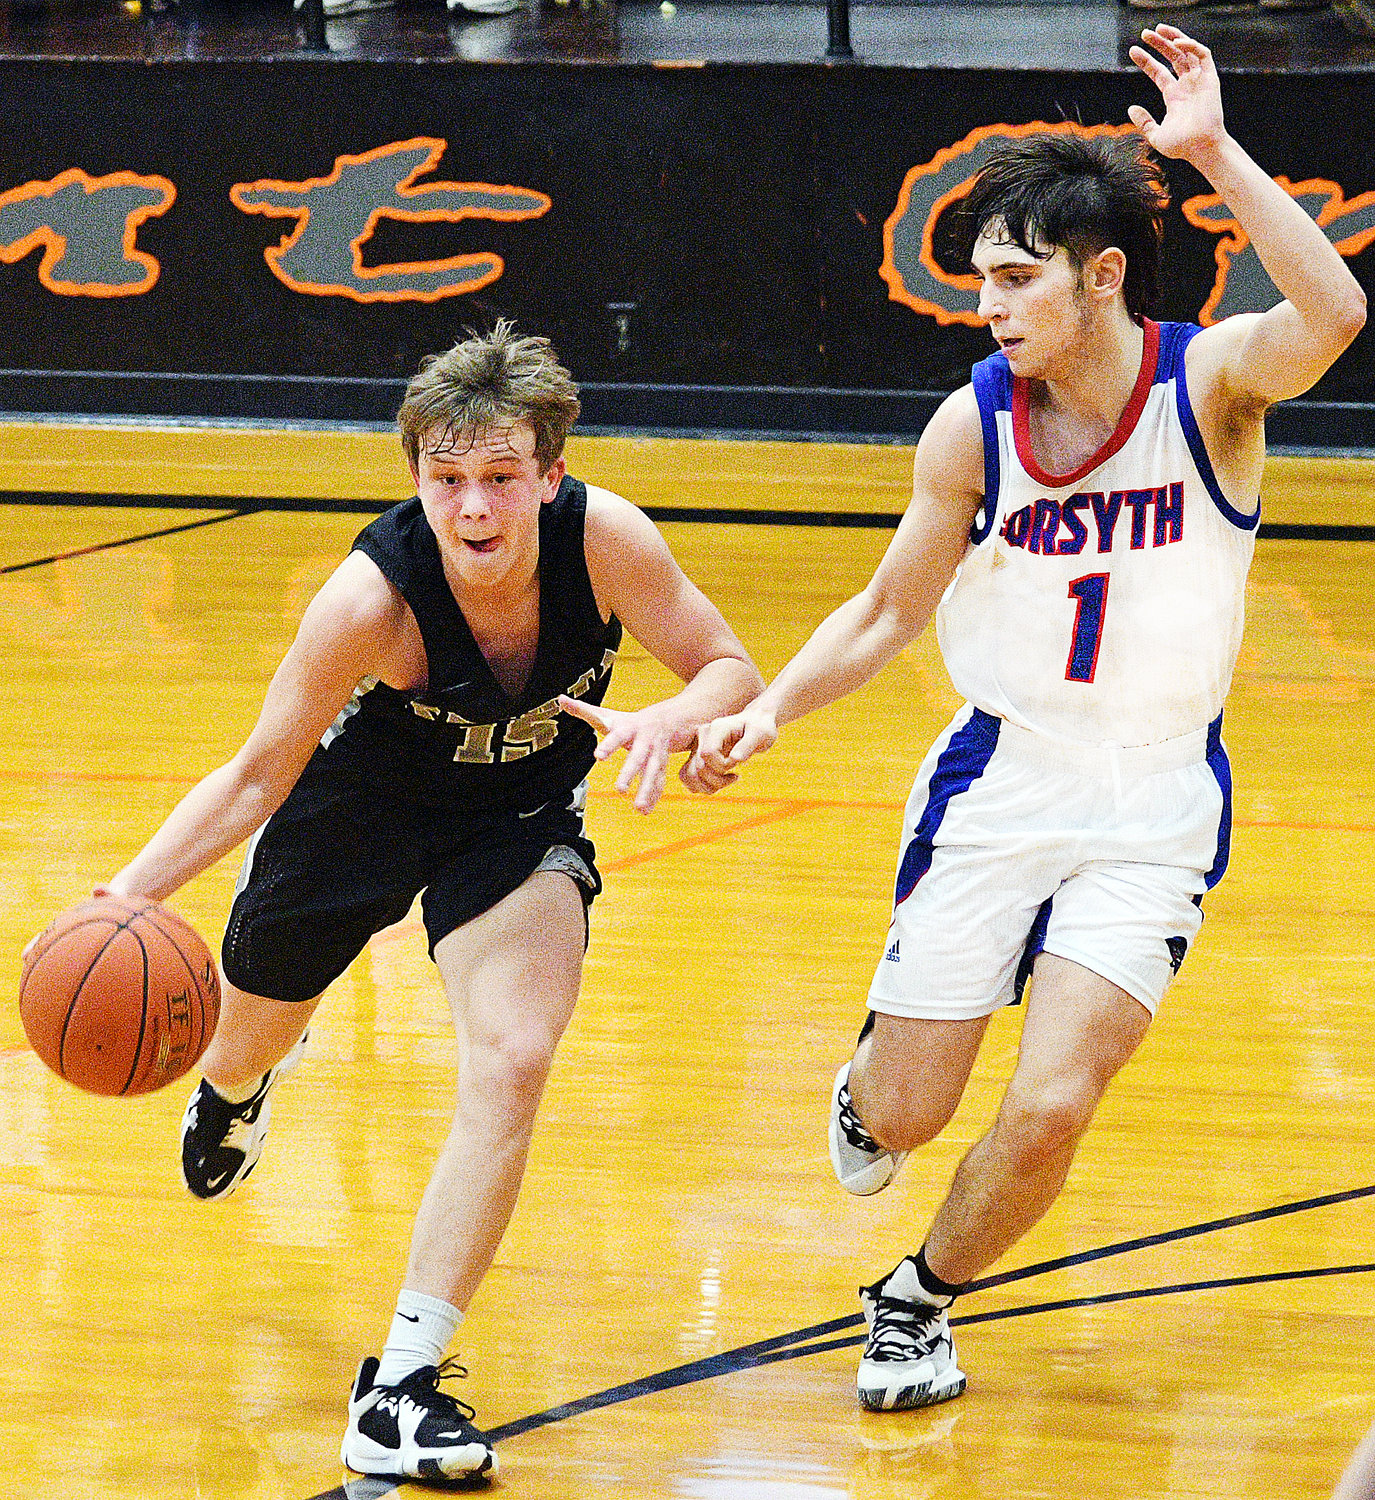 SPARTA'S KAVAN WALKR and the Trojans host Skyline tonight at 7 in District action.